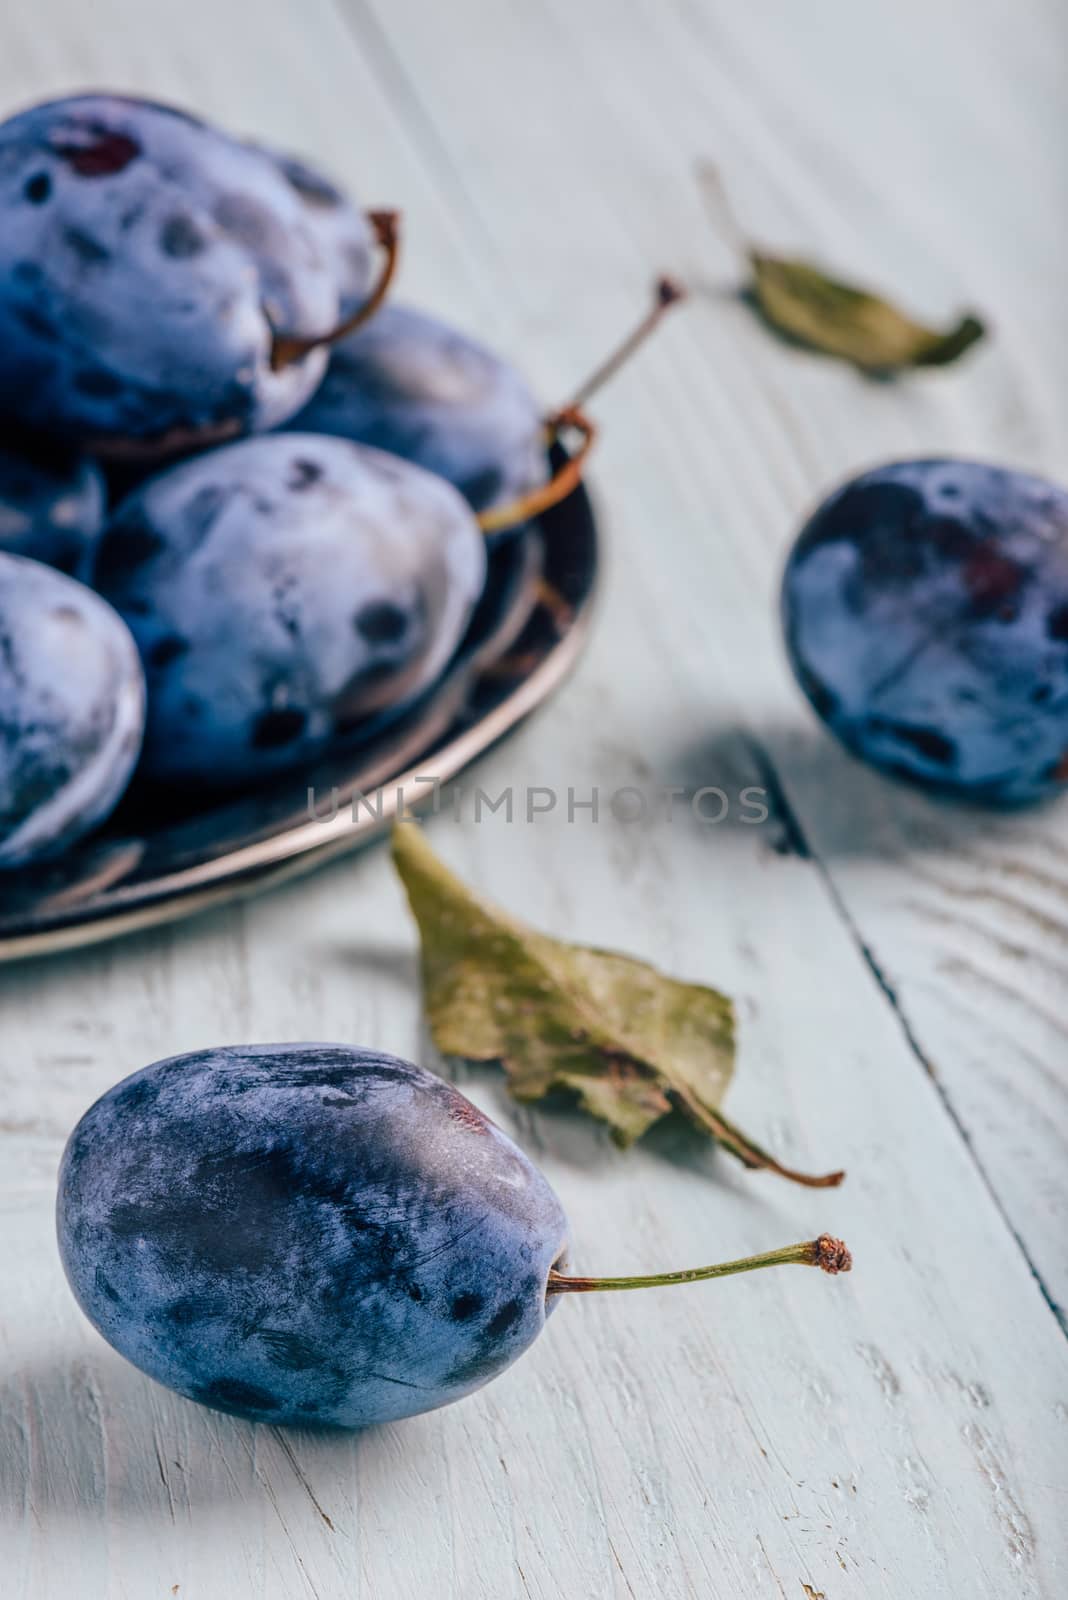 Ripe plums on metal plate and light wooden surface with leaves